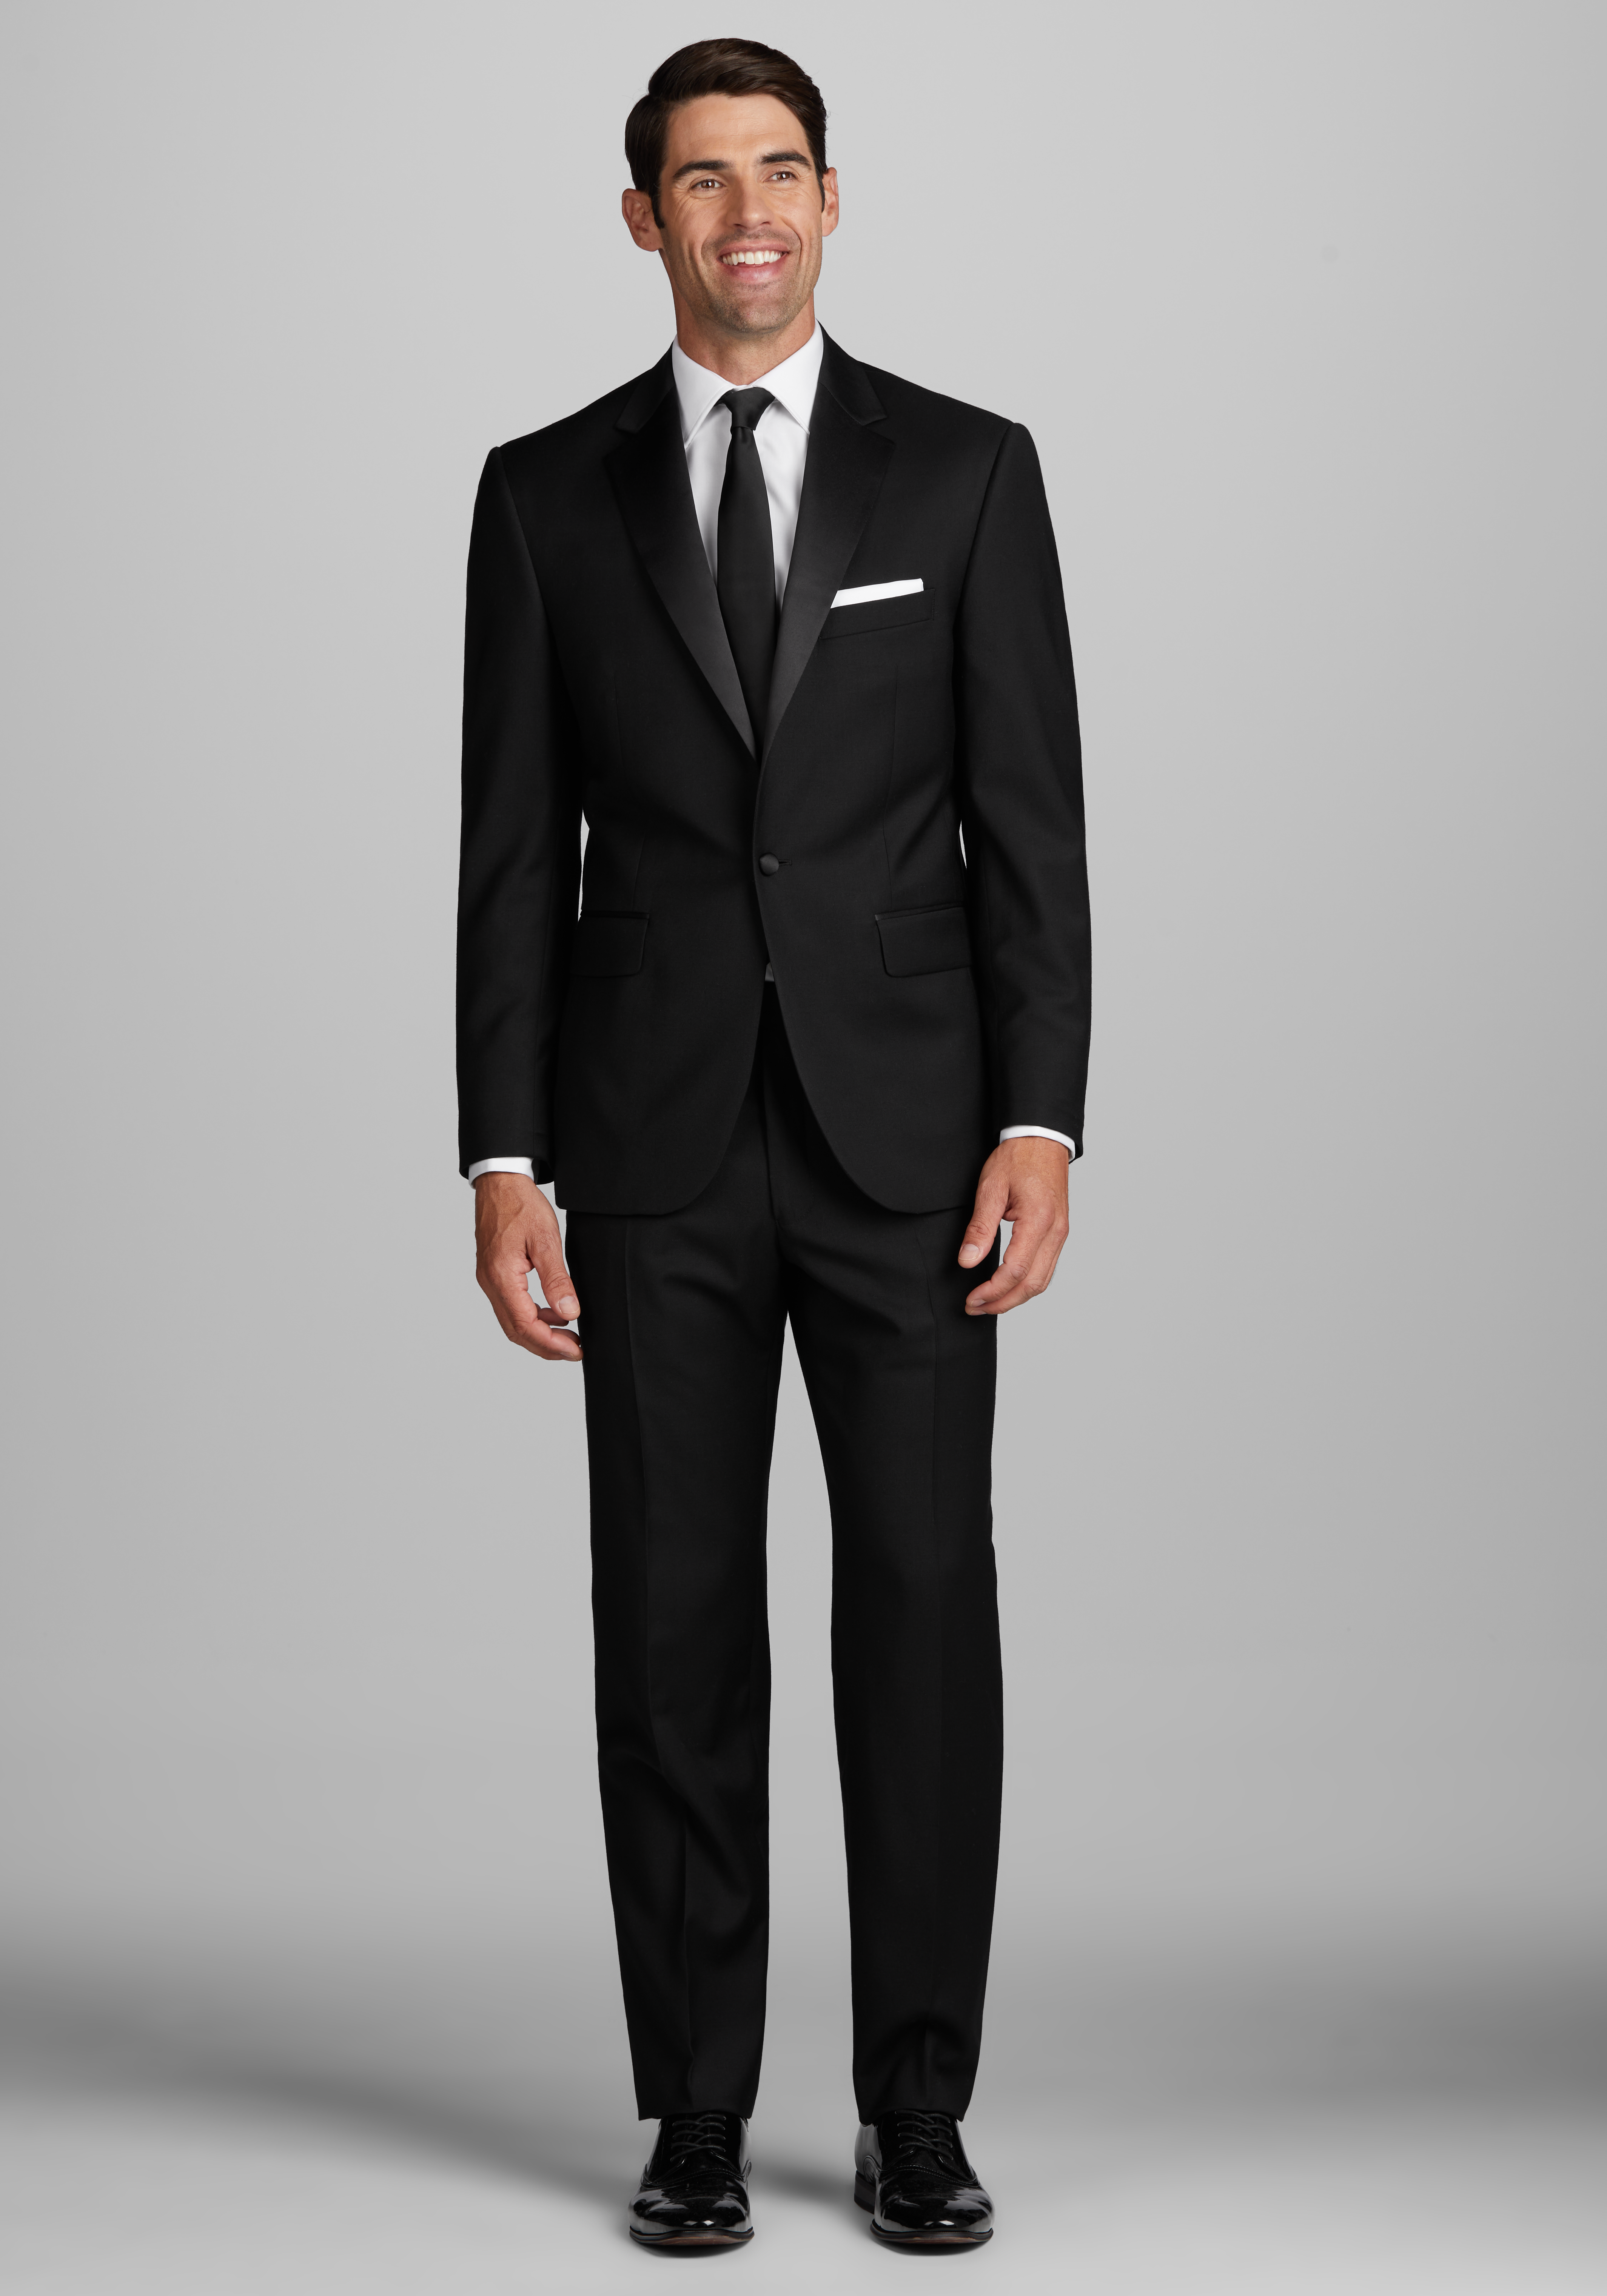 Tuxedos for Sale Online, Suits for Men